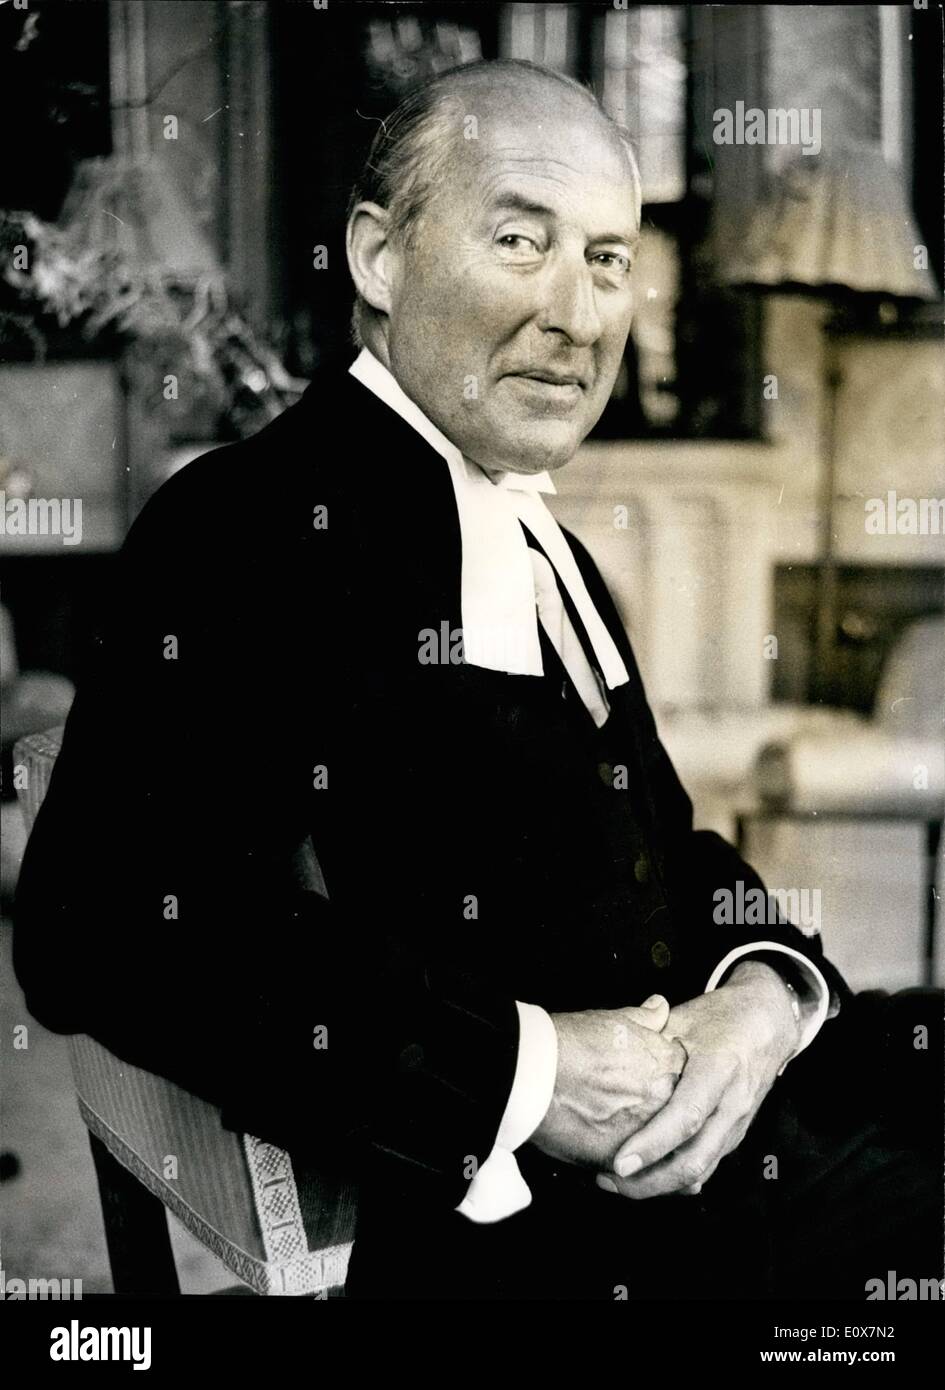 Sep. 09, 1965 - Speaker of the House of Commons Dies: Sir Harry Hylton-Foster, Speaker of the House of Commons, collapsed and died in St.James Piccadilly today. He was 60. Sir Harry, a QC, had been Speaker since October 1959. Photo shows Sir Harry Hylton Foster who collapsed and died in London today. Stock Photo